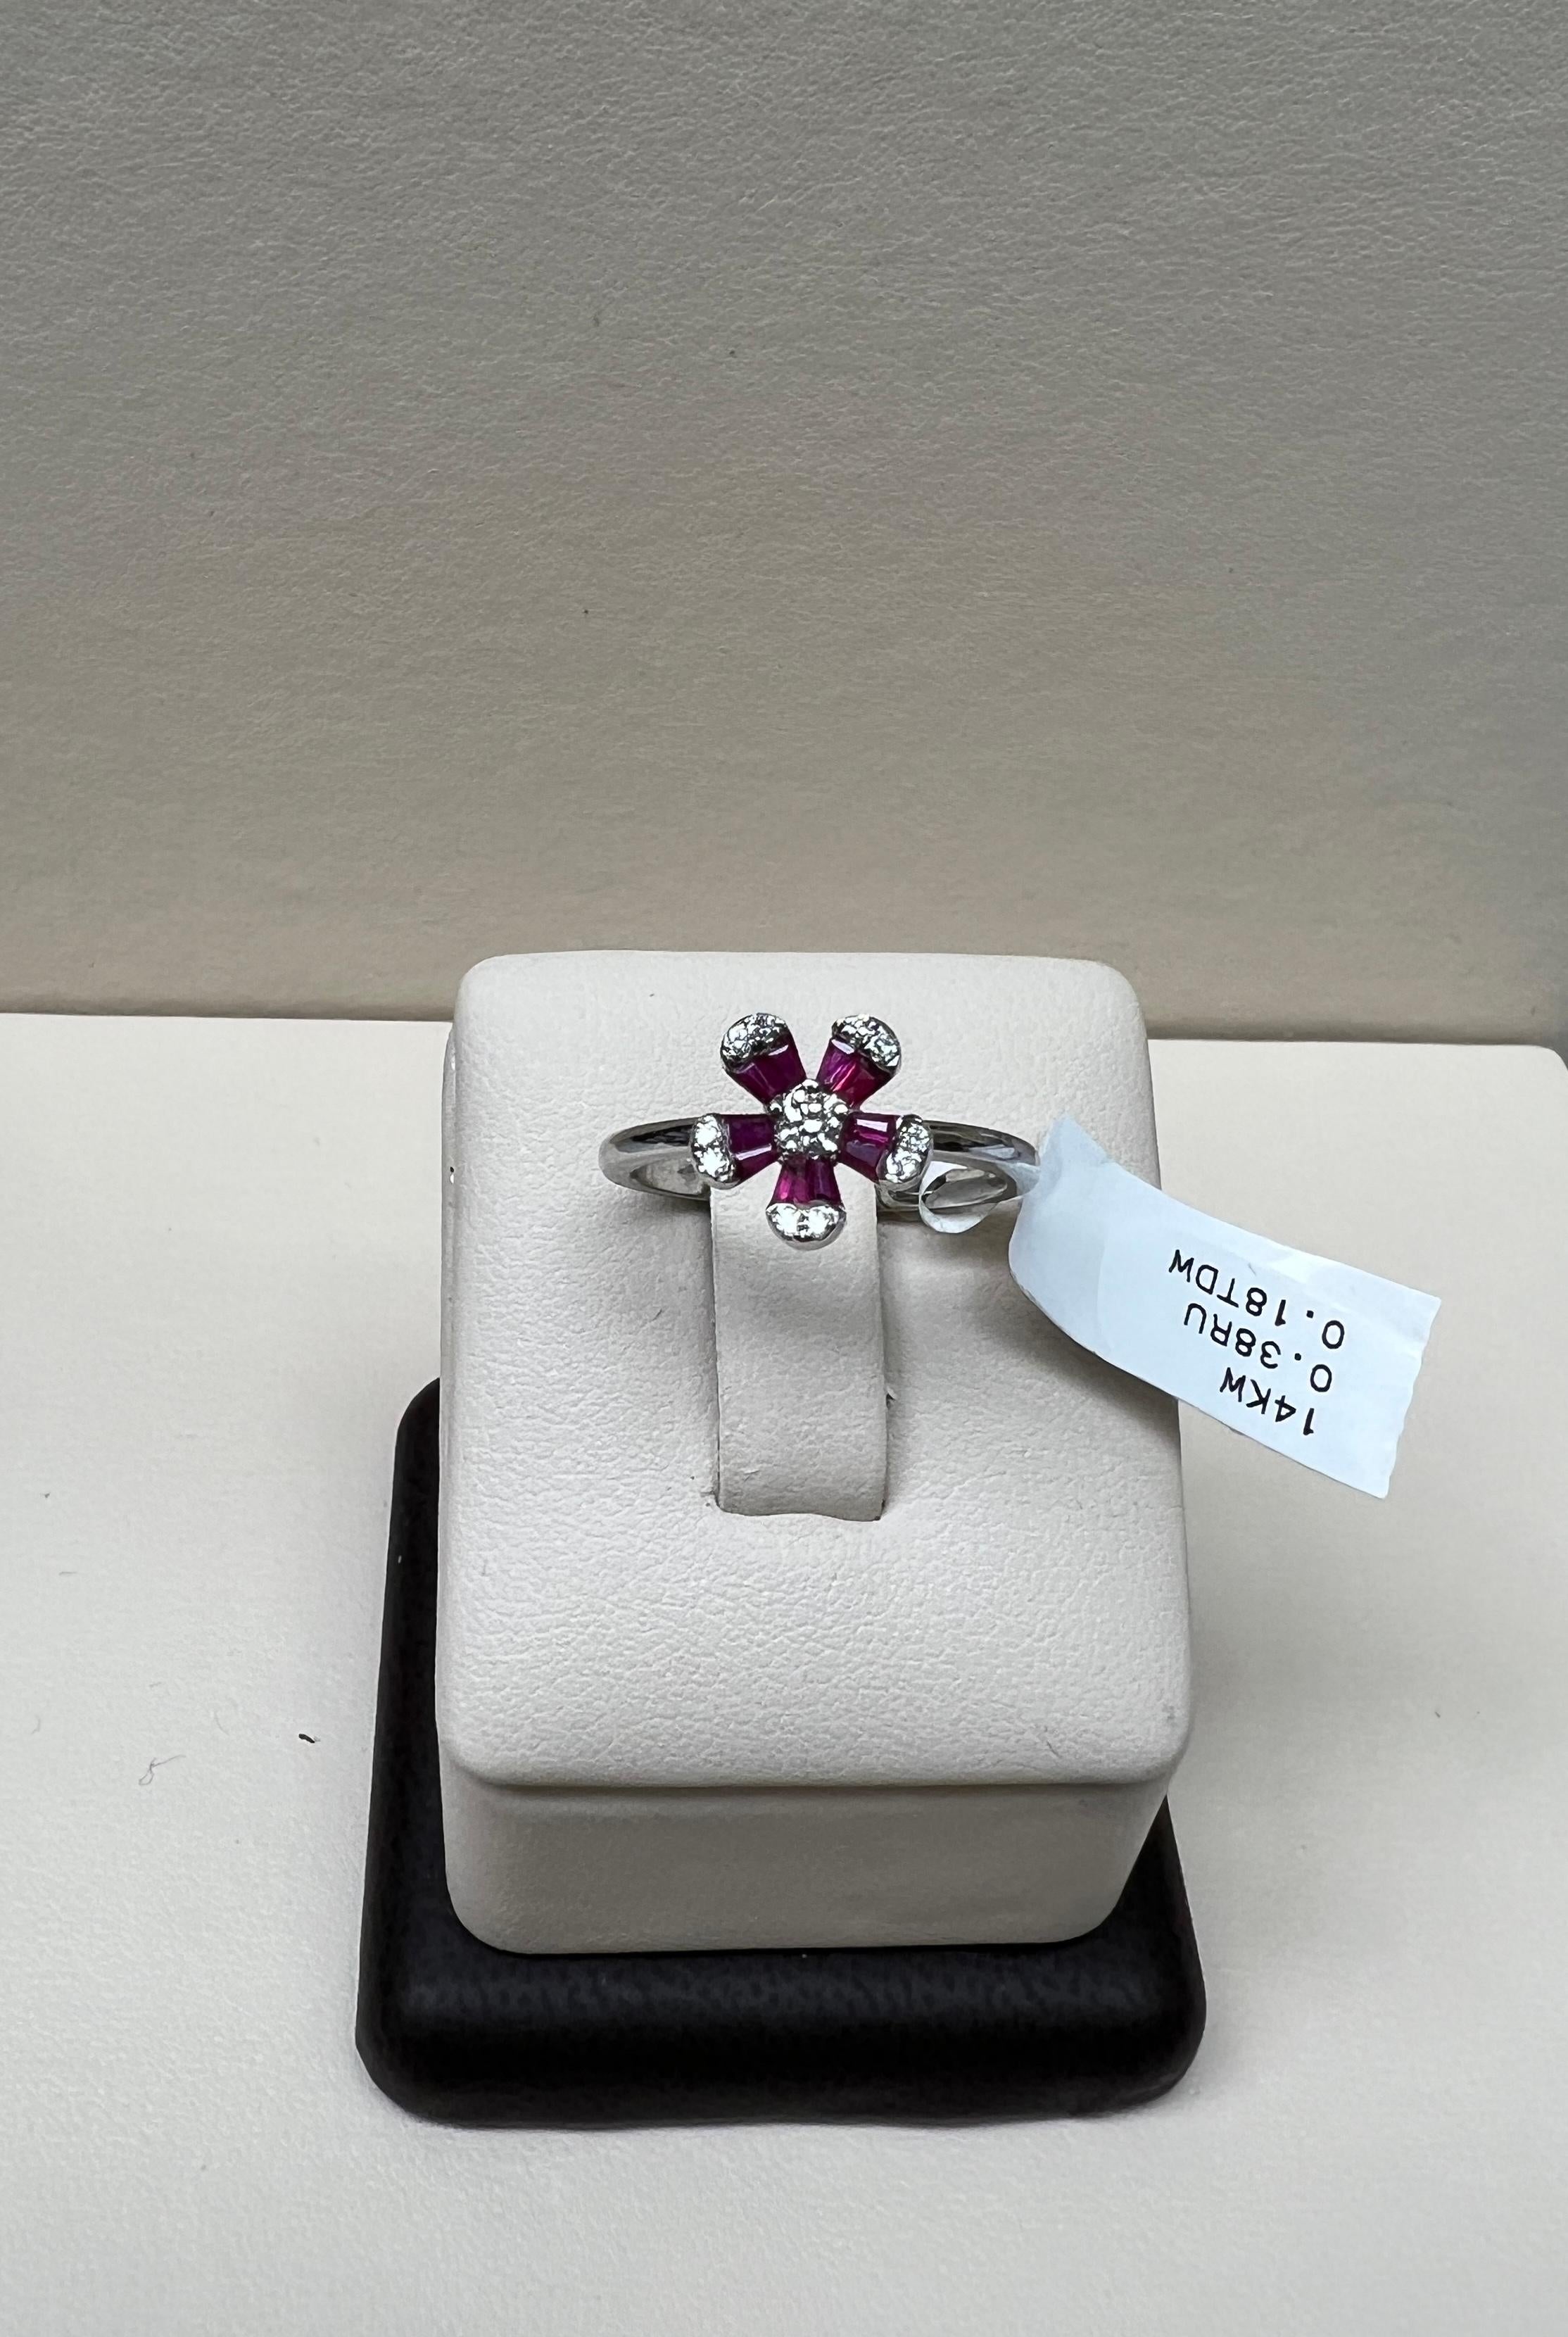 Solid 14K White Gold

Natural Round White Diamonds .18 Total Diamond Weight

G-H Color SI Clarity 

Natural Red Ruby Baguettes .38 Total Carat Weight

Size 6.5 - Sizable 

Free Insured Shipping